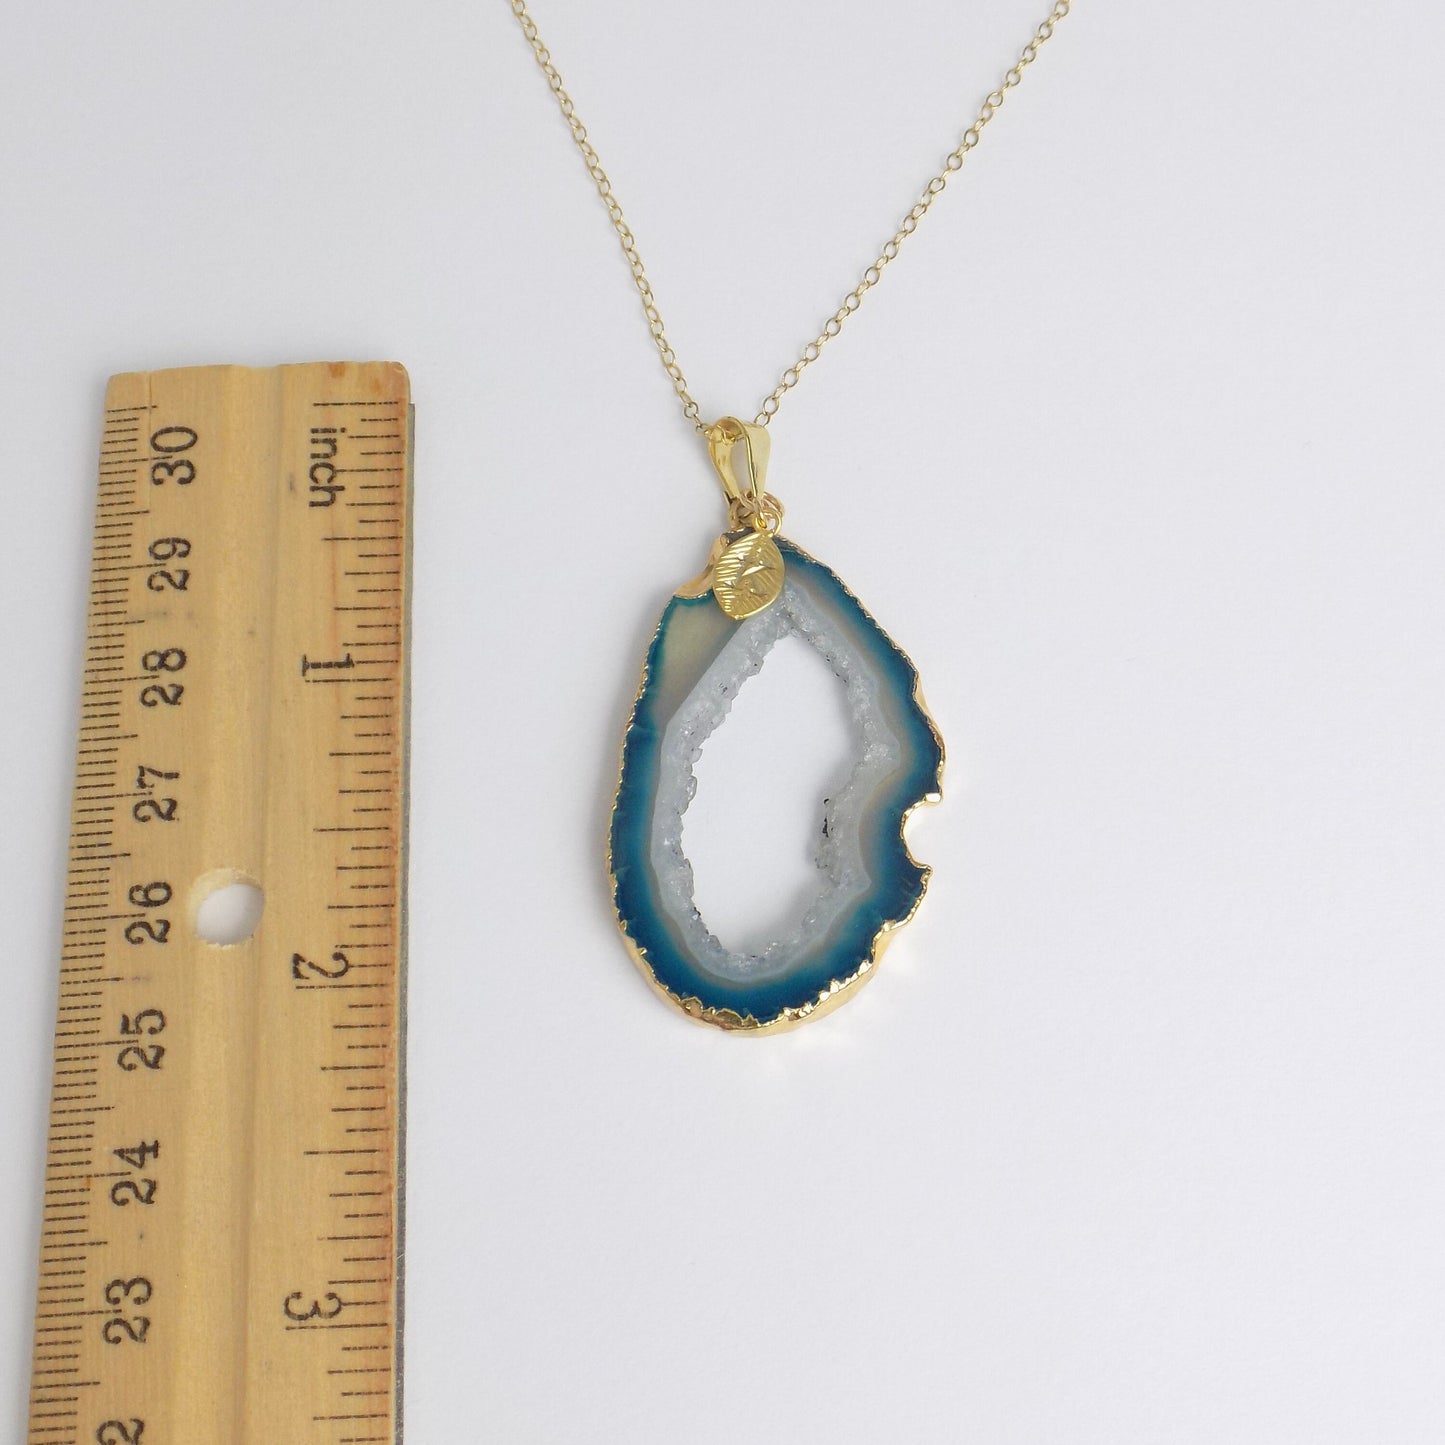 Natural Geode Slice Crystal Necklace in Teal Blue Gold Dipped with Custom Stamped Initial, G14-843